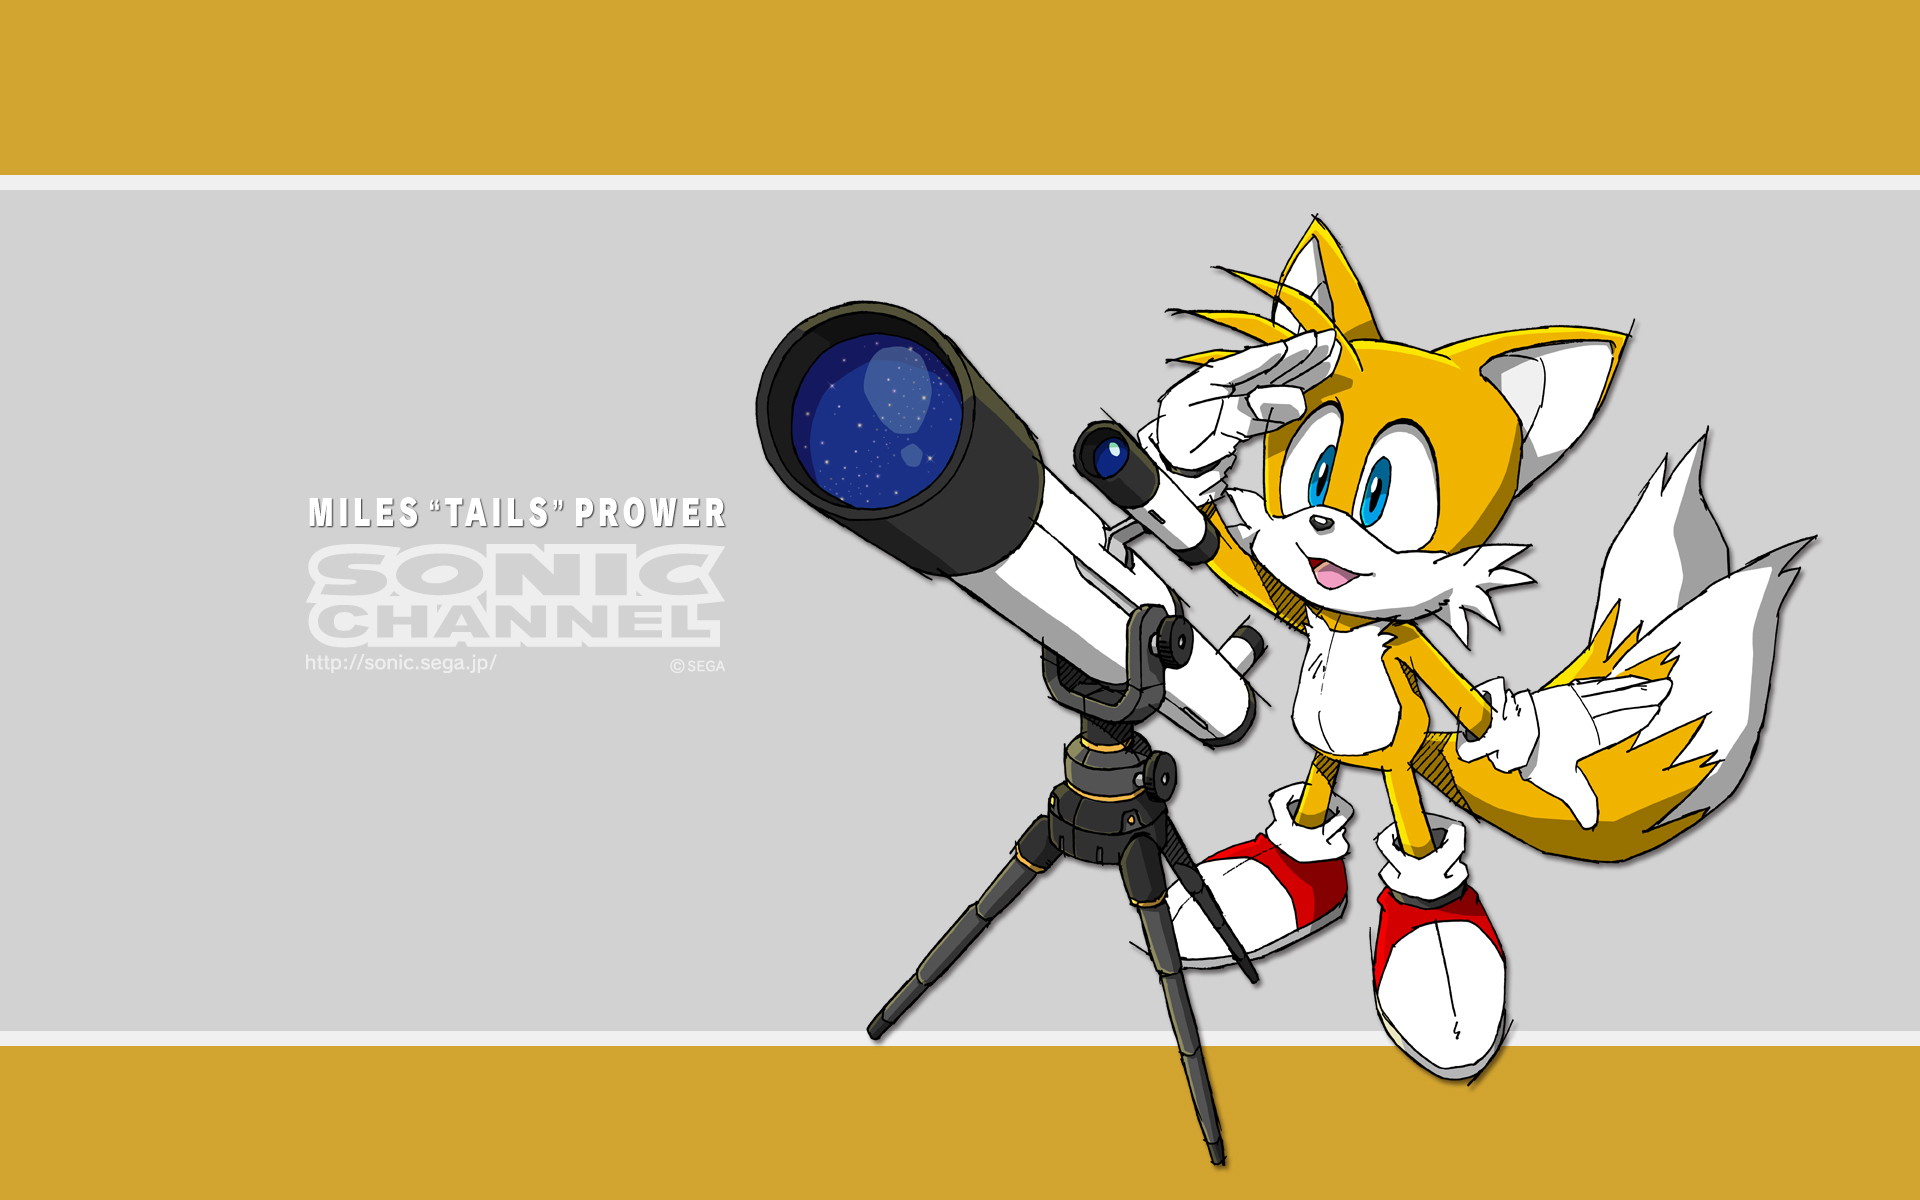 2014 / 07 - Miles Tails Prower - Sonic Channel - Gallery - Sonic SCANF